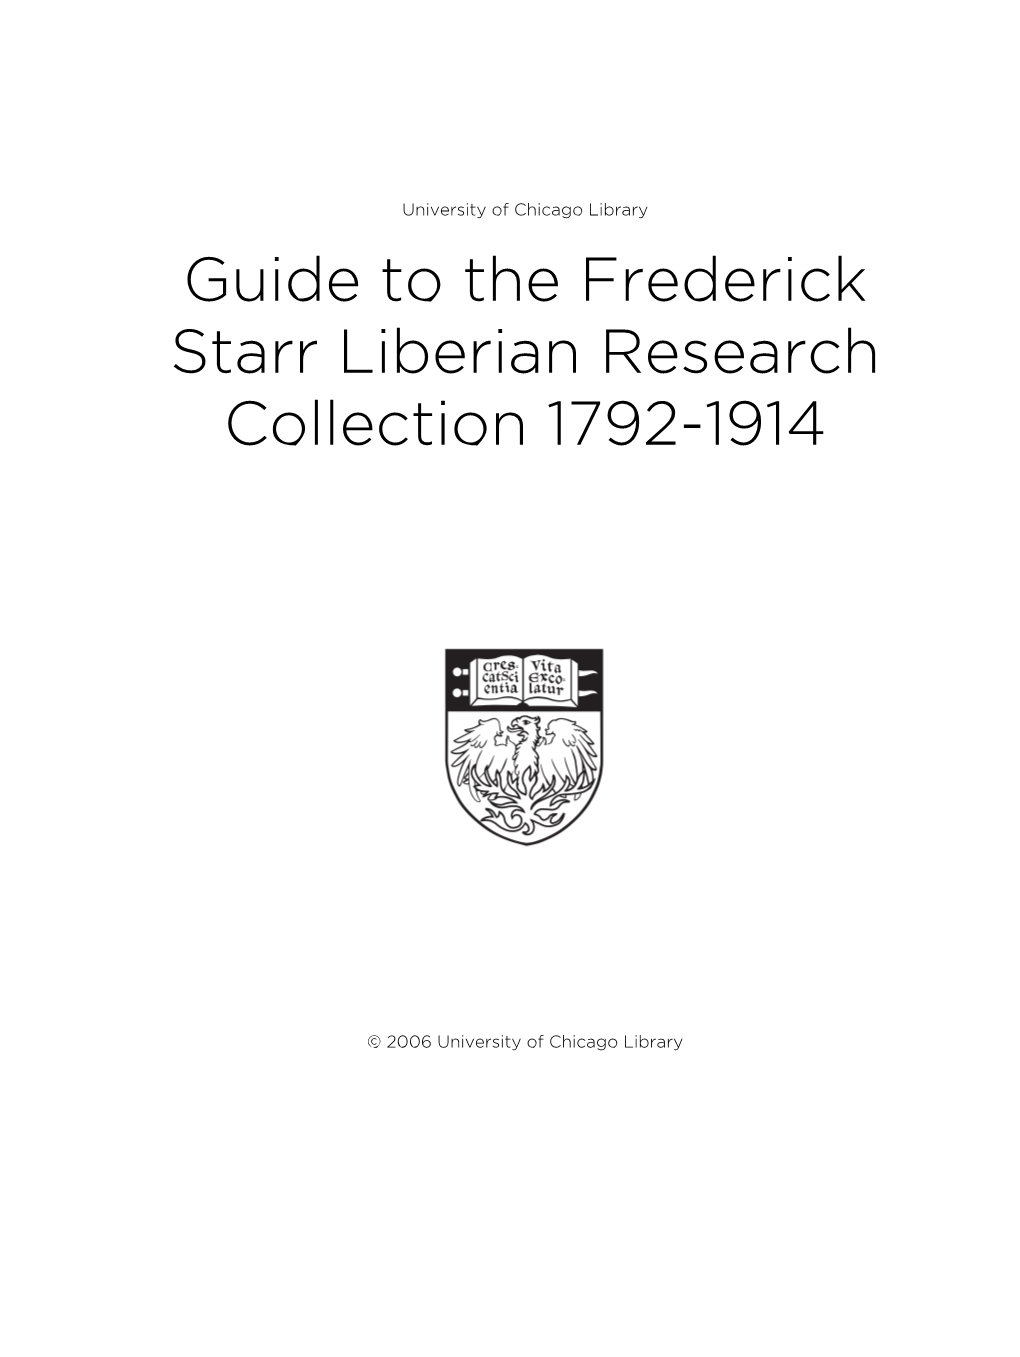 Guide to the Frederick Starr Liberian Research Collection 1792-1914